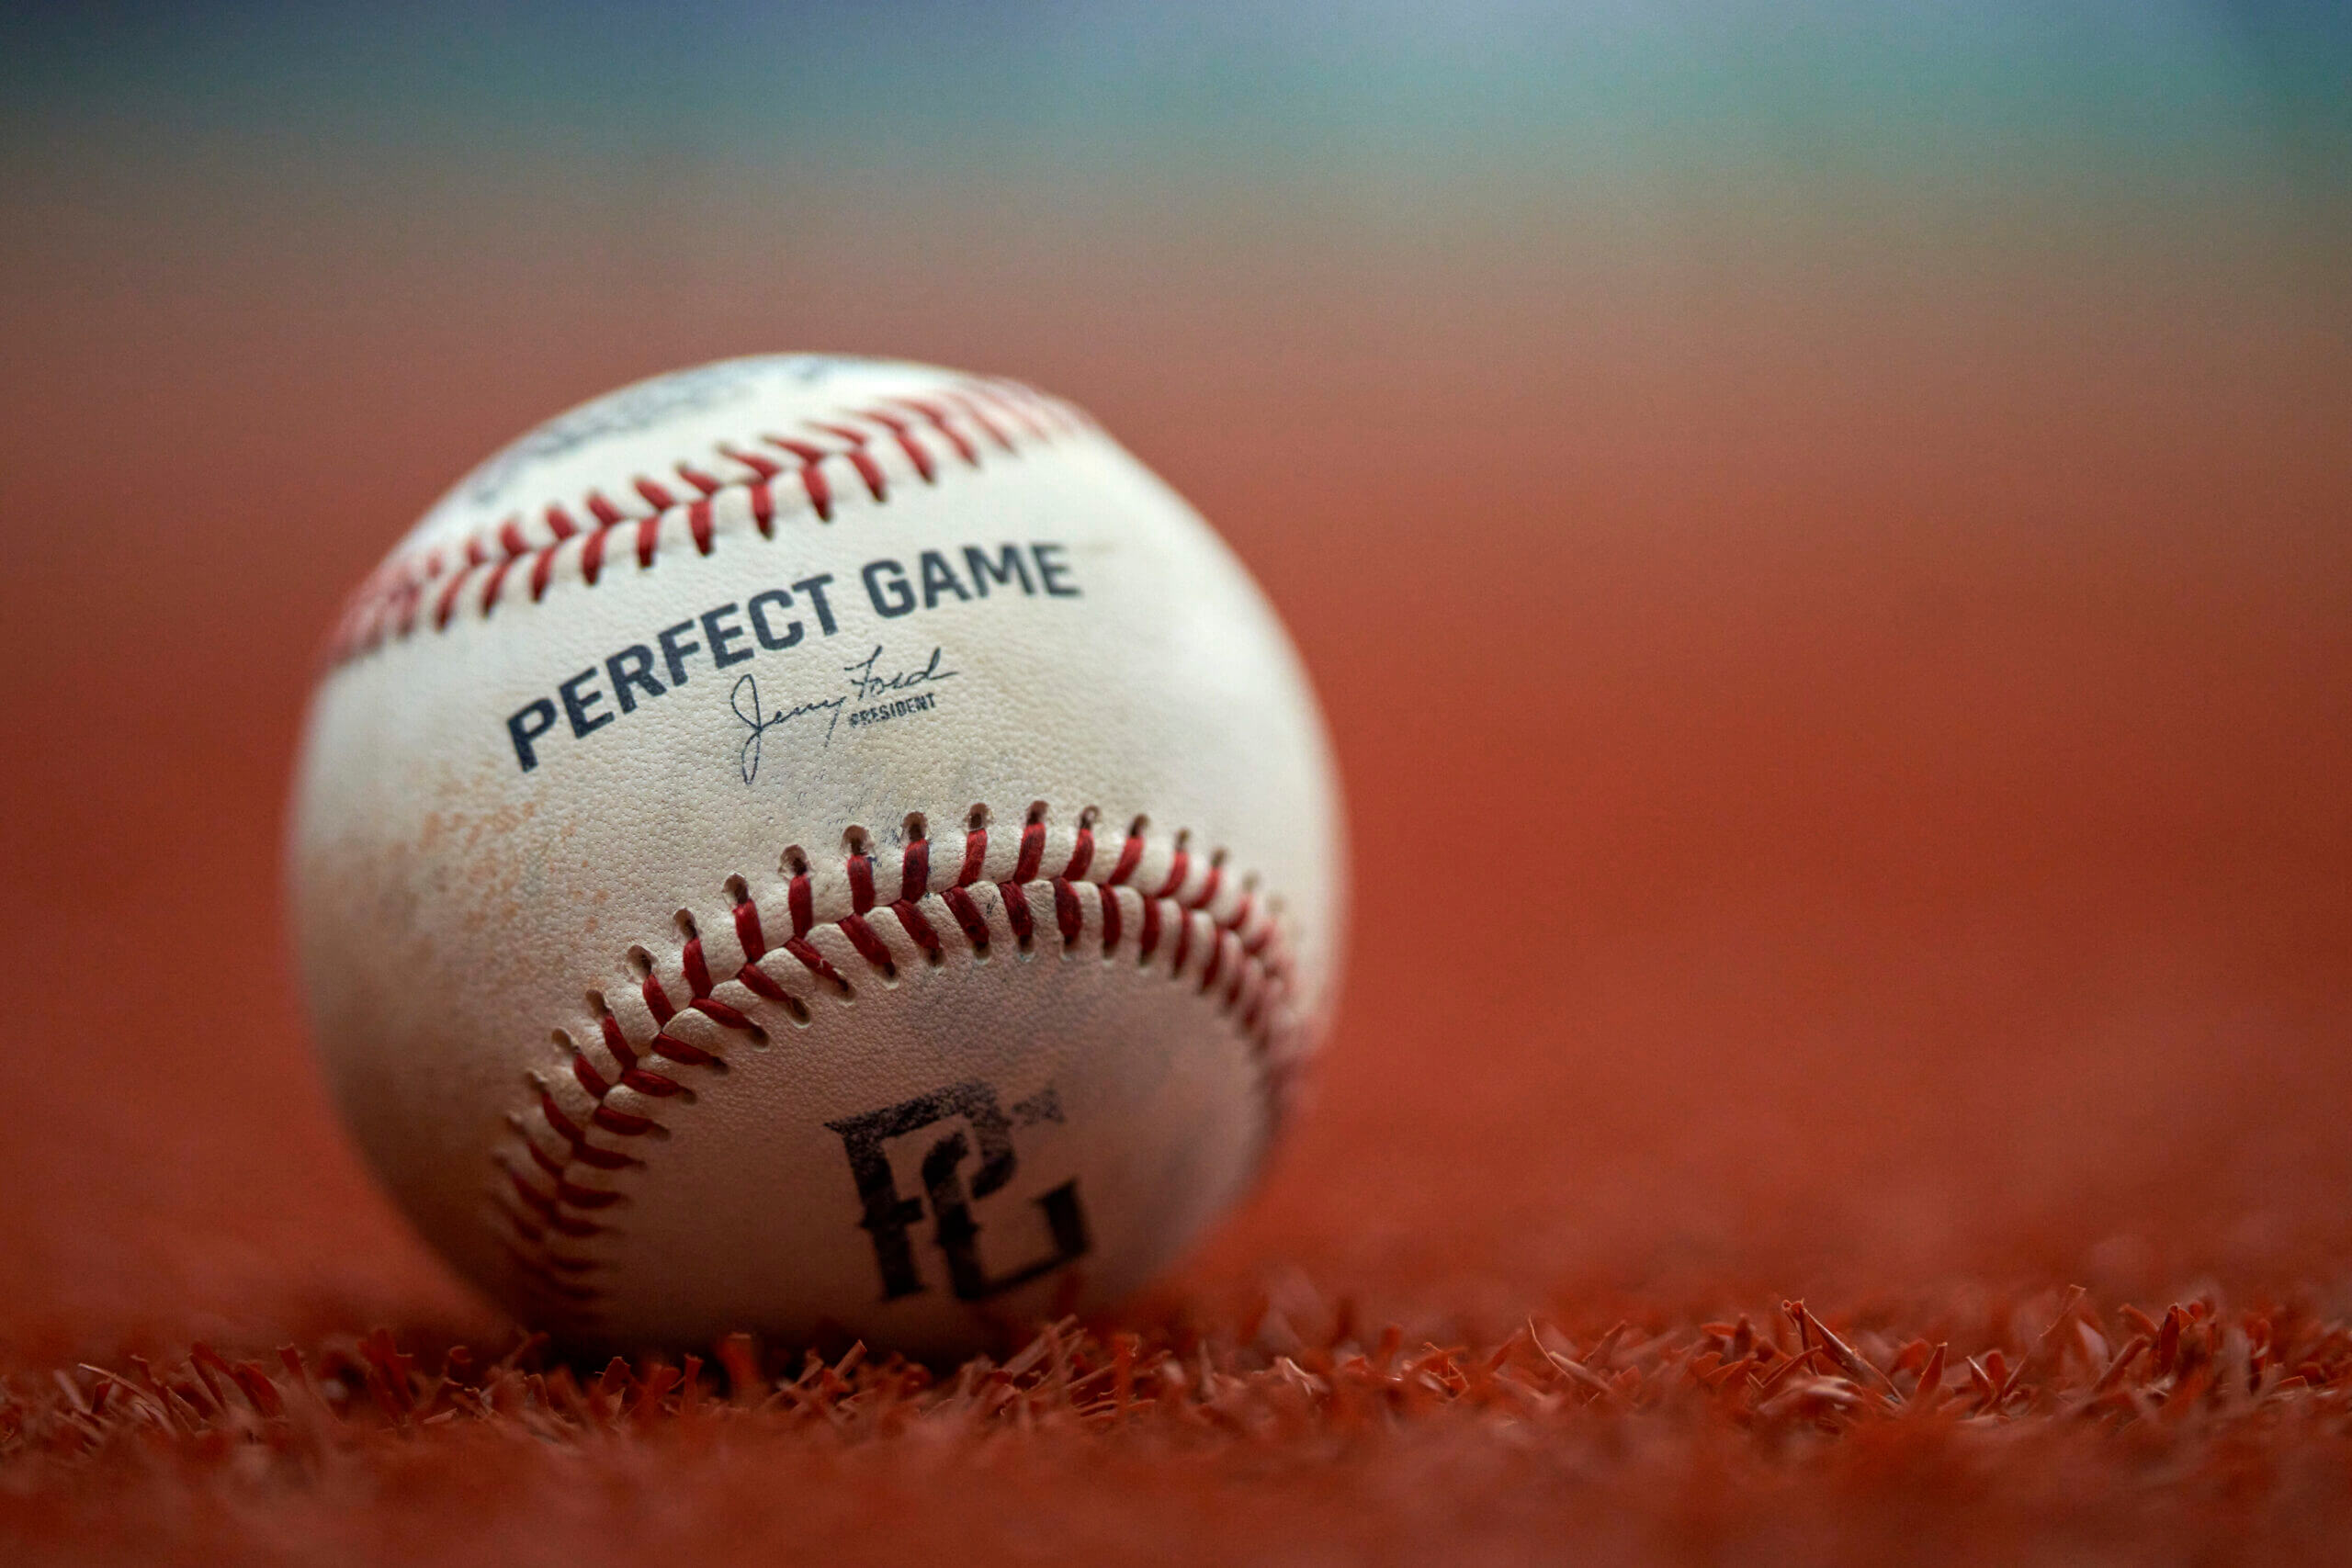 Why the Perfect Game, Fanatics deal has agents raising concerns about amateur player rights